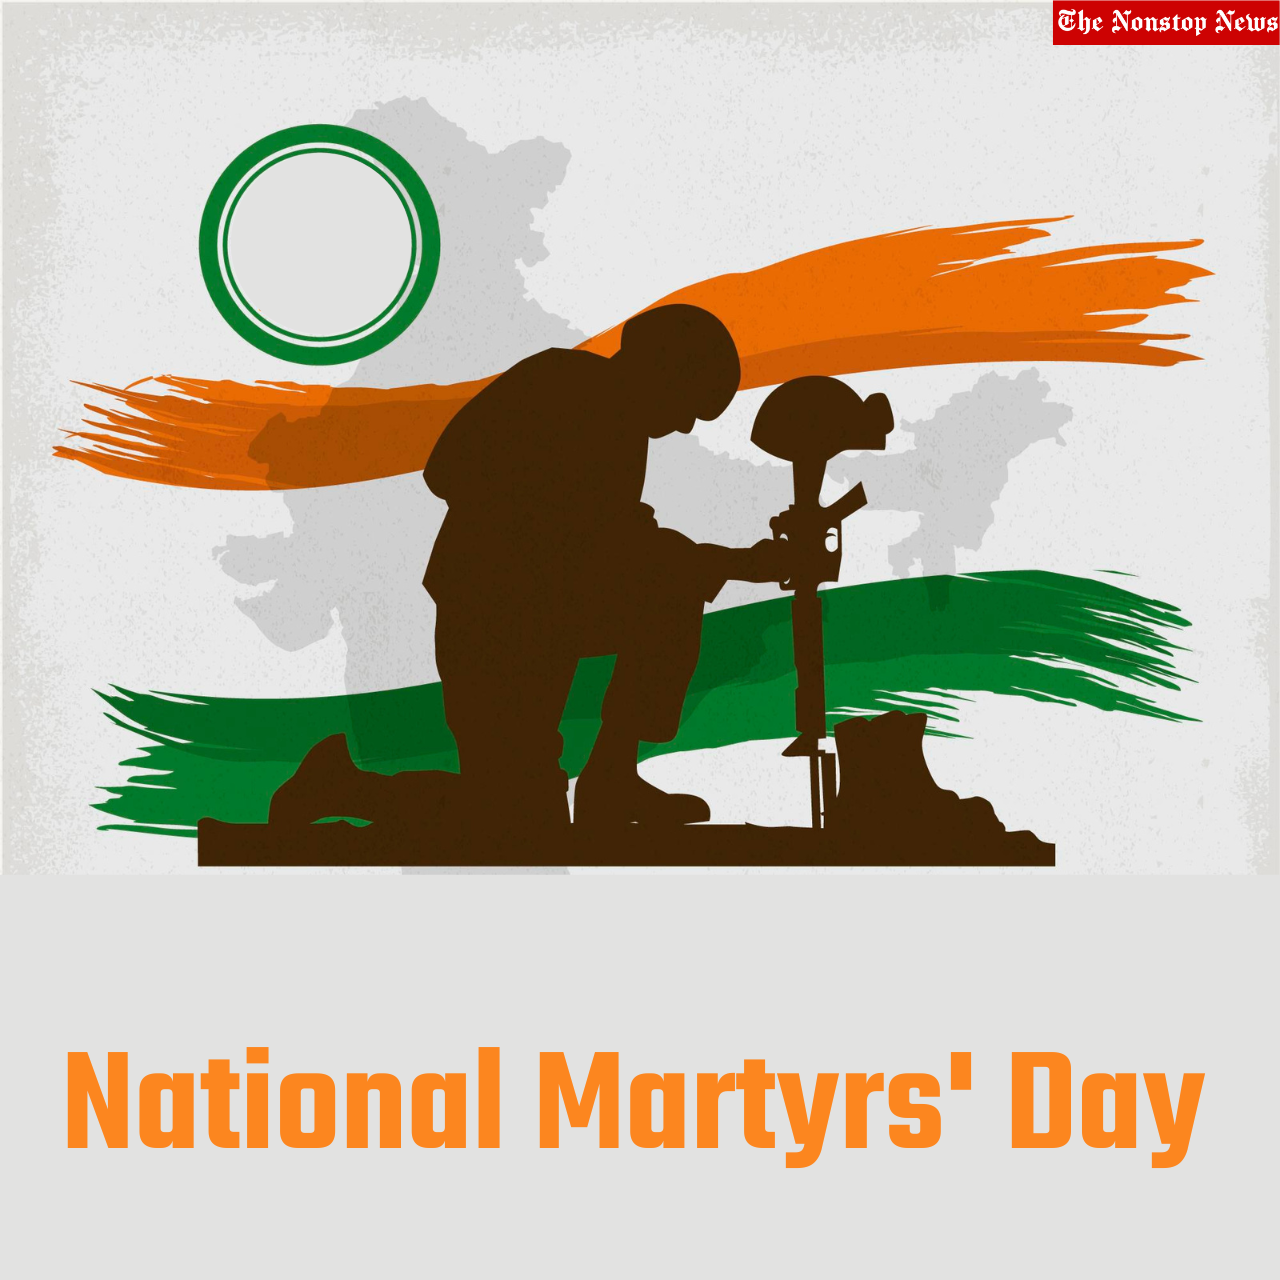 Martyr's Day 2023 Quotes, Wishes, Images, Greetings, Messages, Quotes, Slogans, Posters, Banners, and Sayings